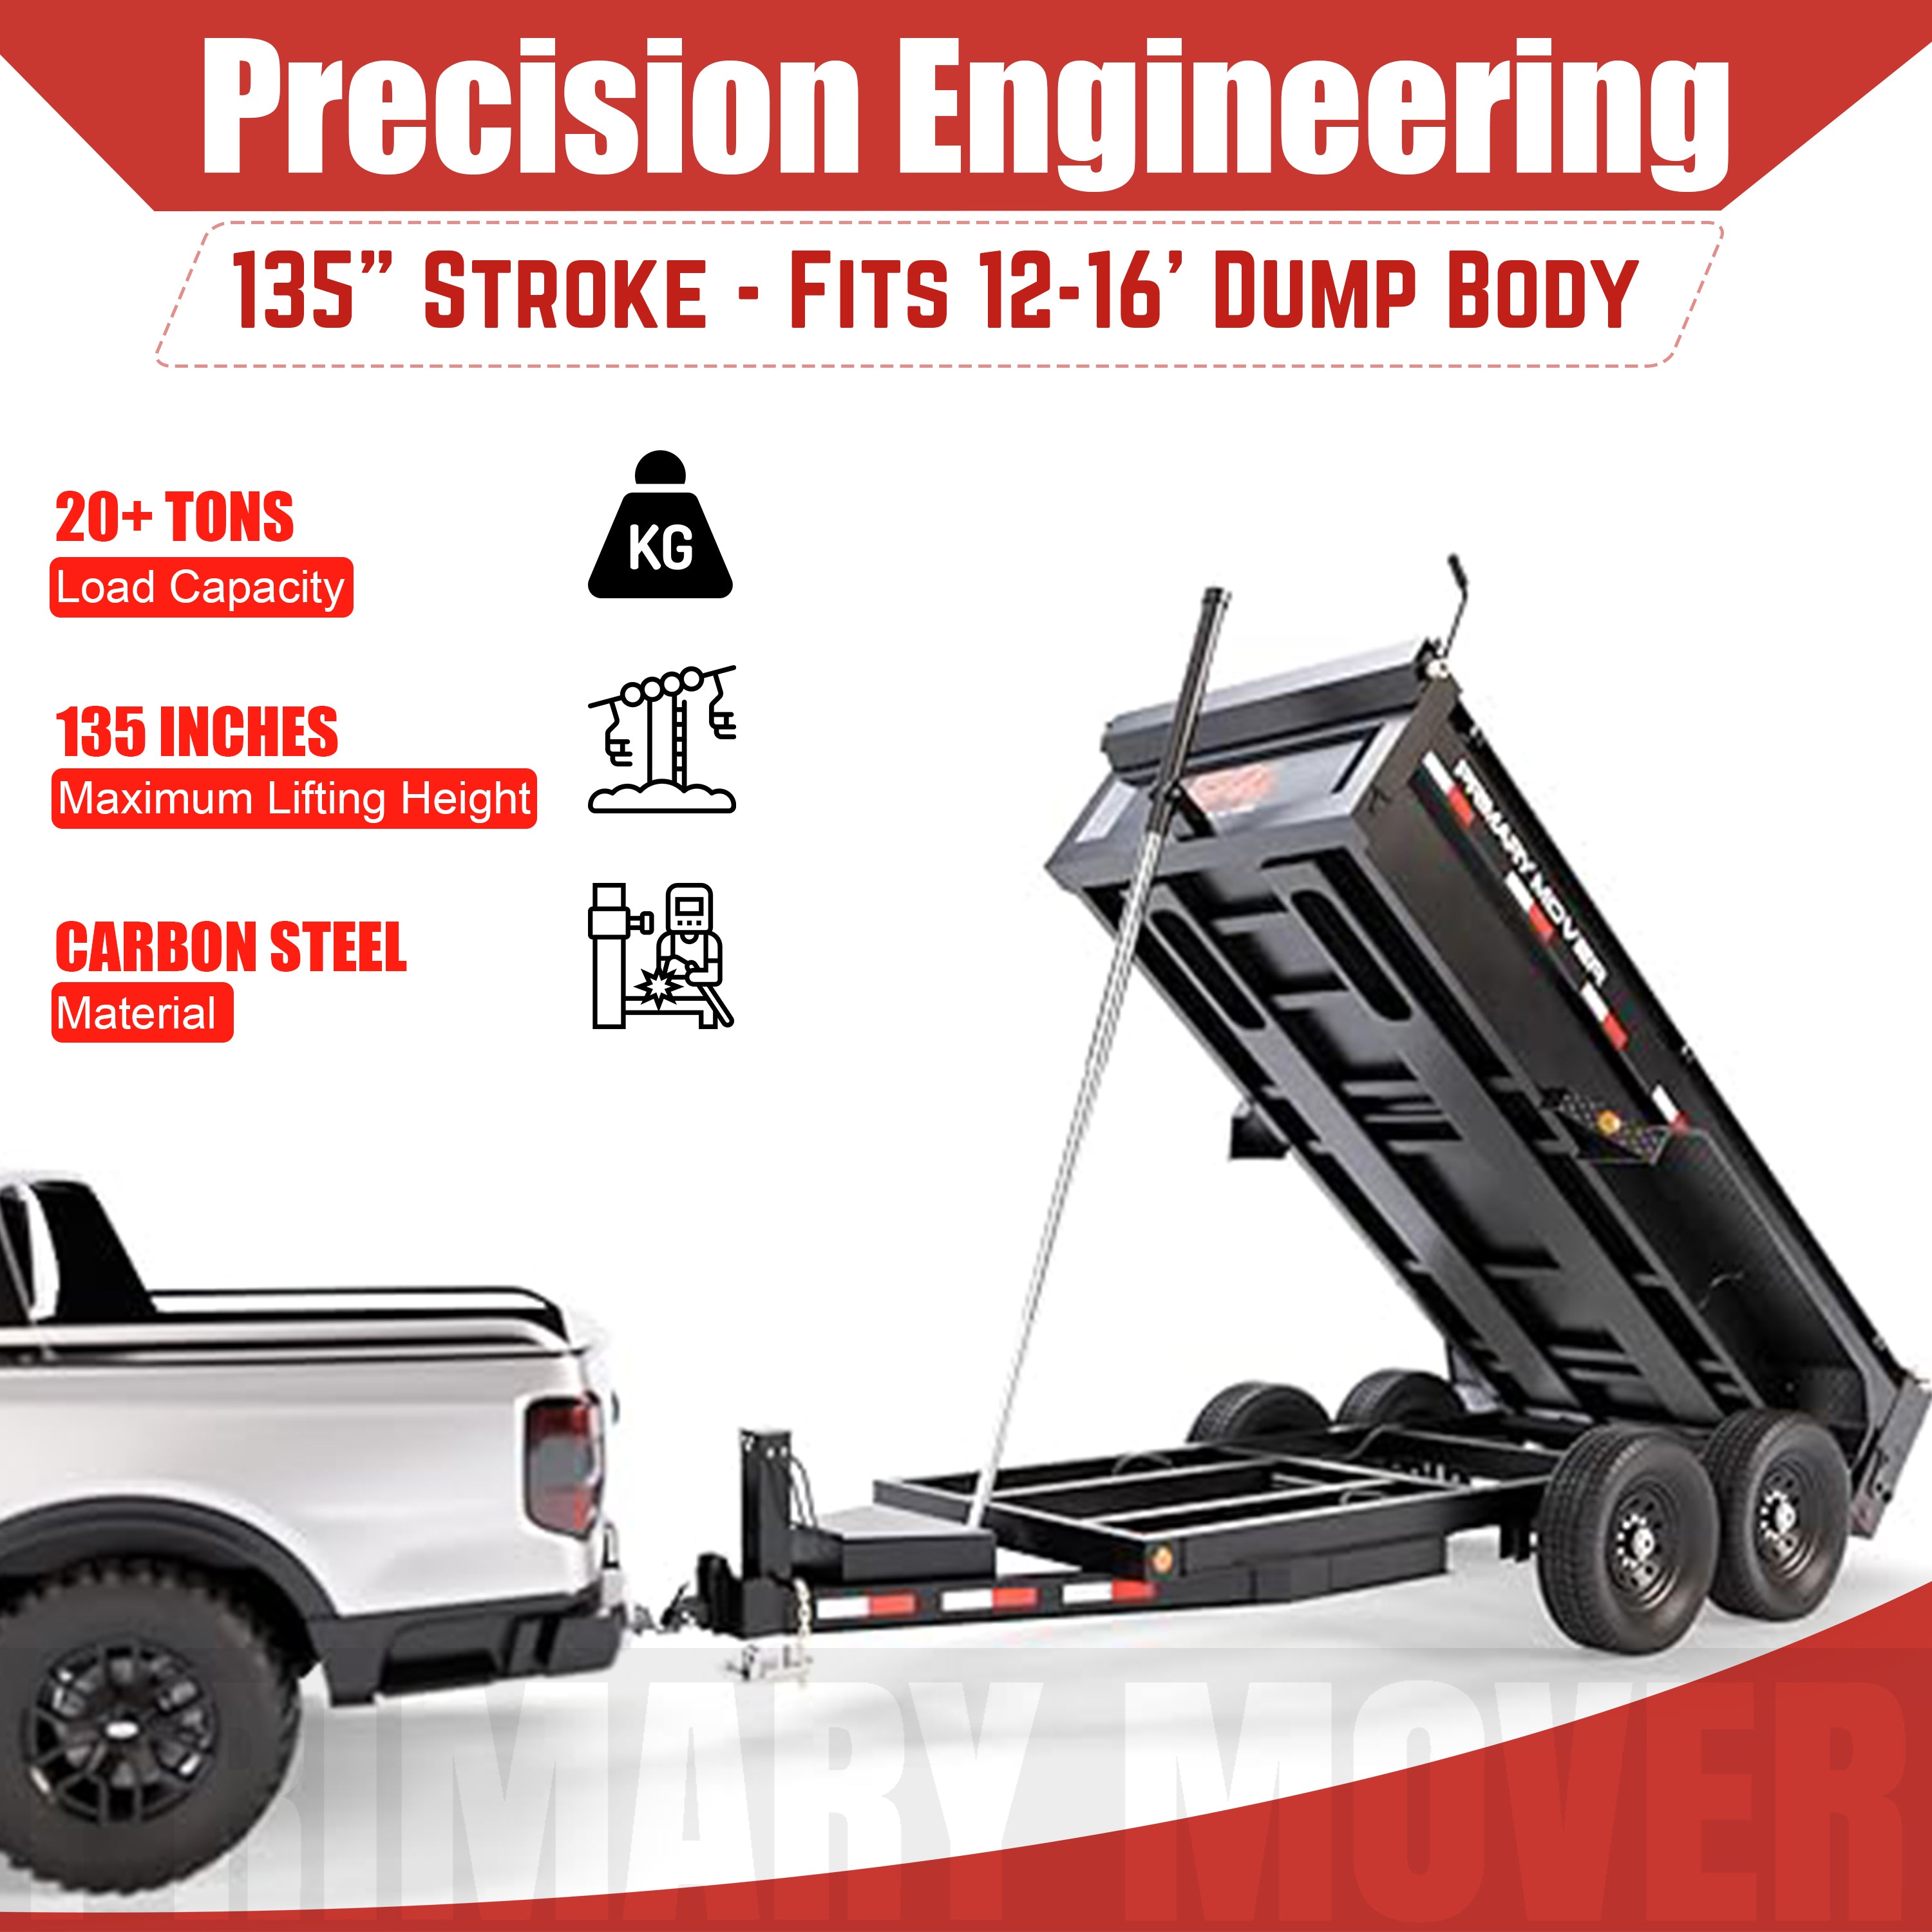 Alt text: Telescopic Dump Trailer Cylinder Kit with 20-ton capacity and 135 stroke, fitting 12-16' dump bodies, shown attached to a black trailer.